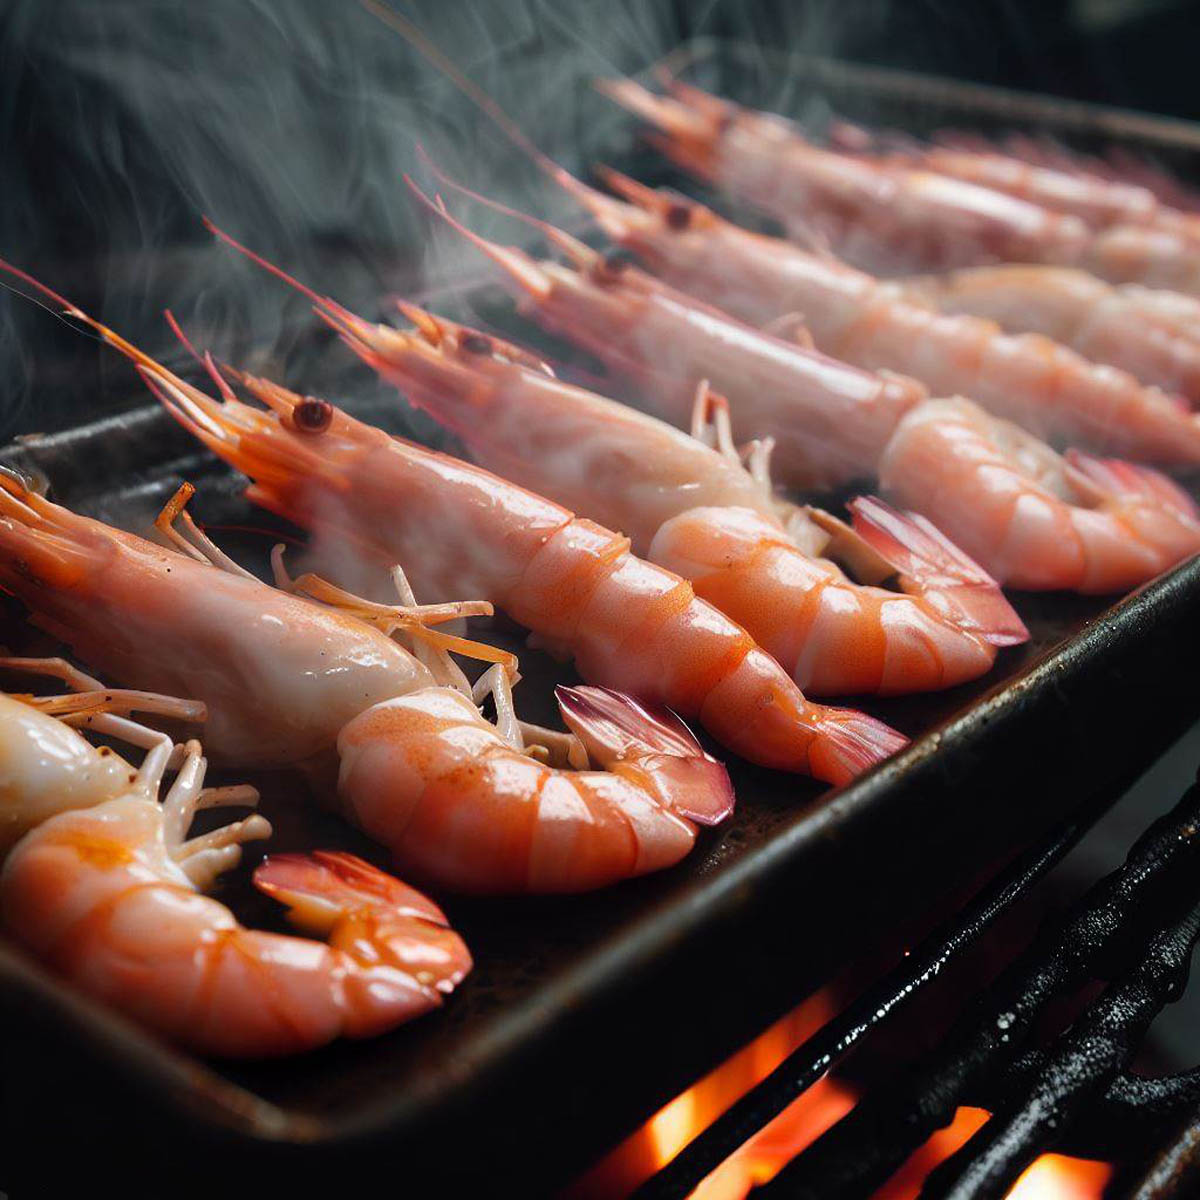 Shrimp skewers sizzling on a grill pan